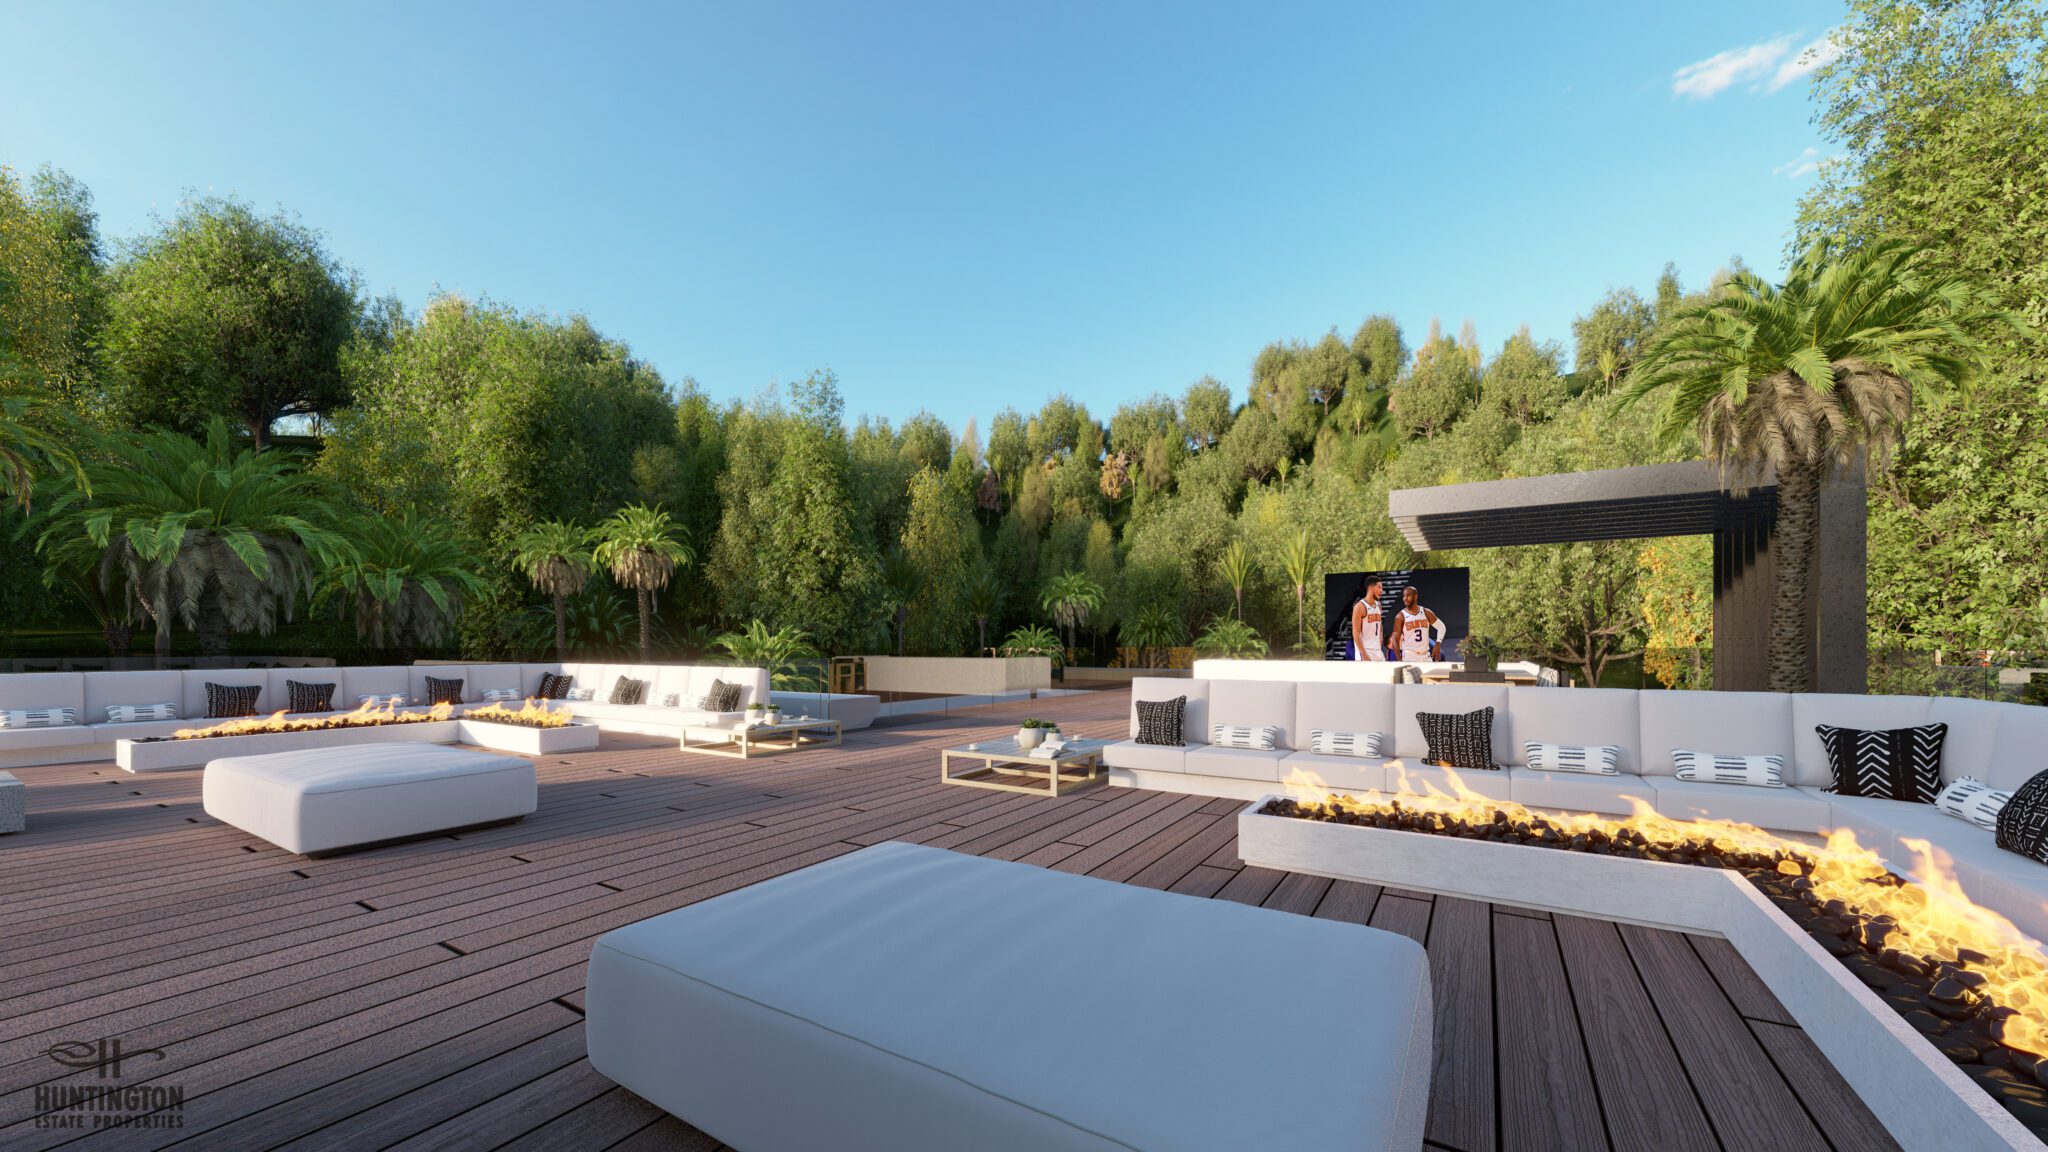 large outdoor entertainment area on wooden deck